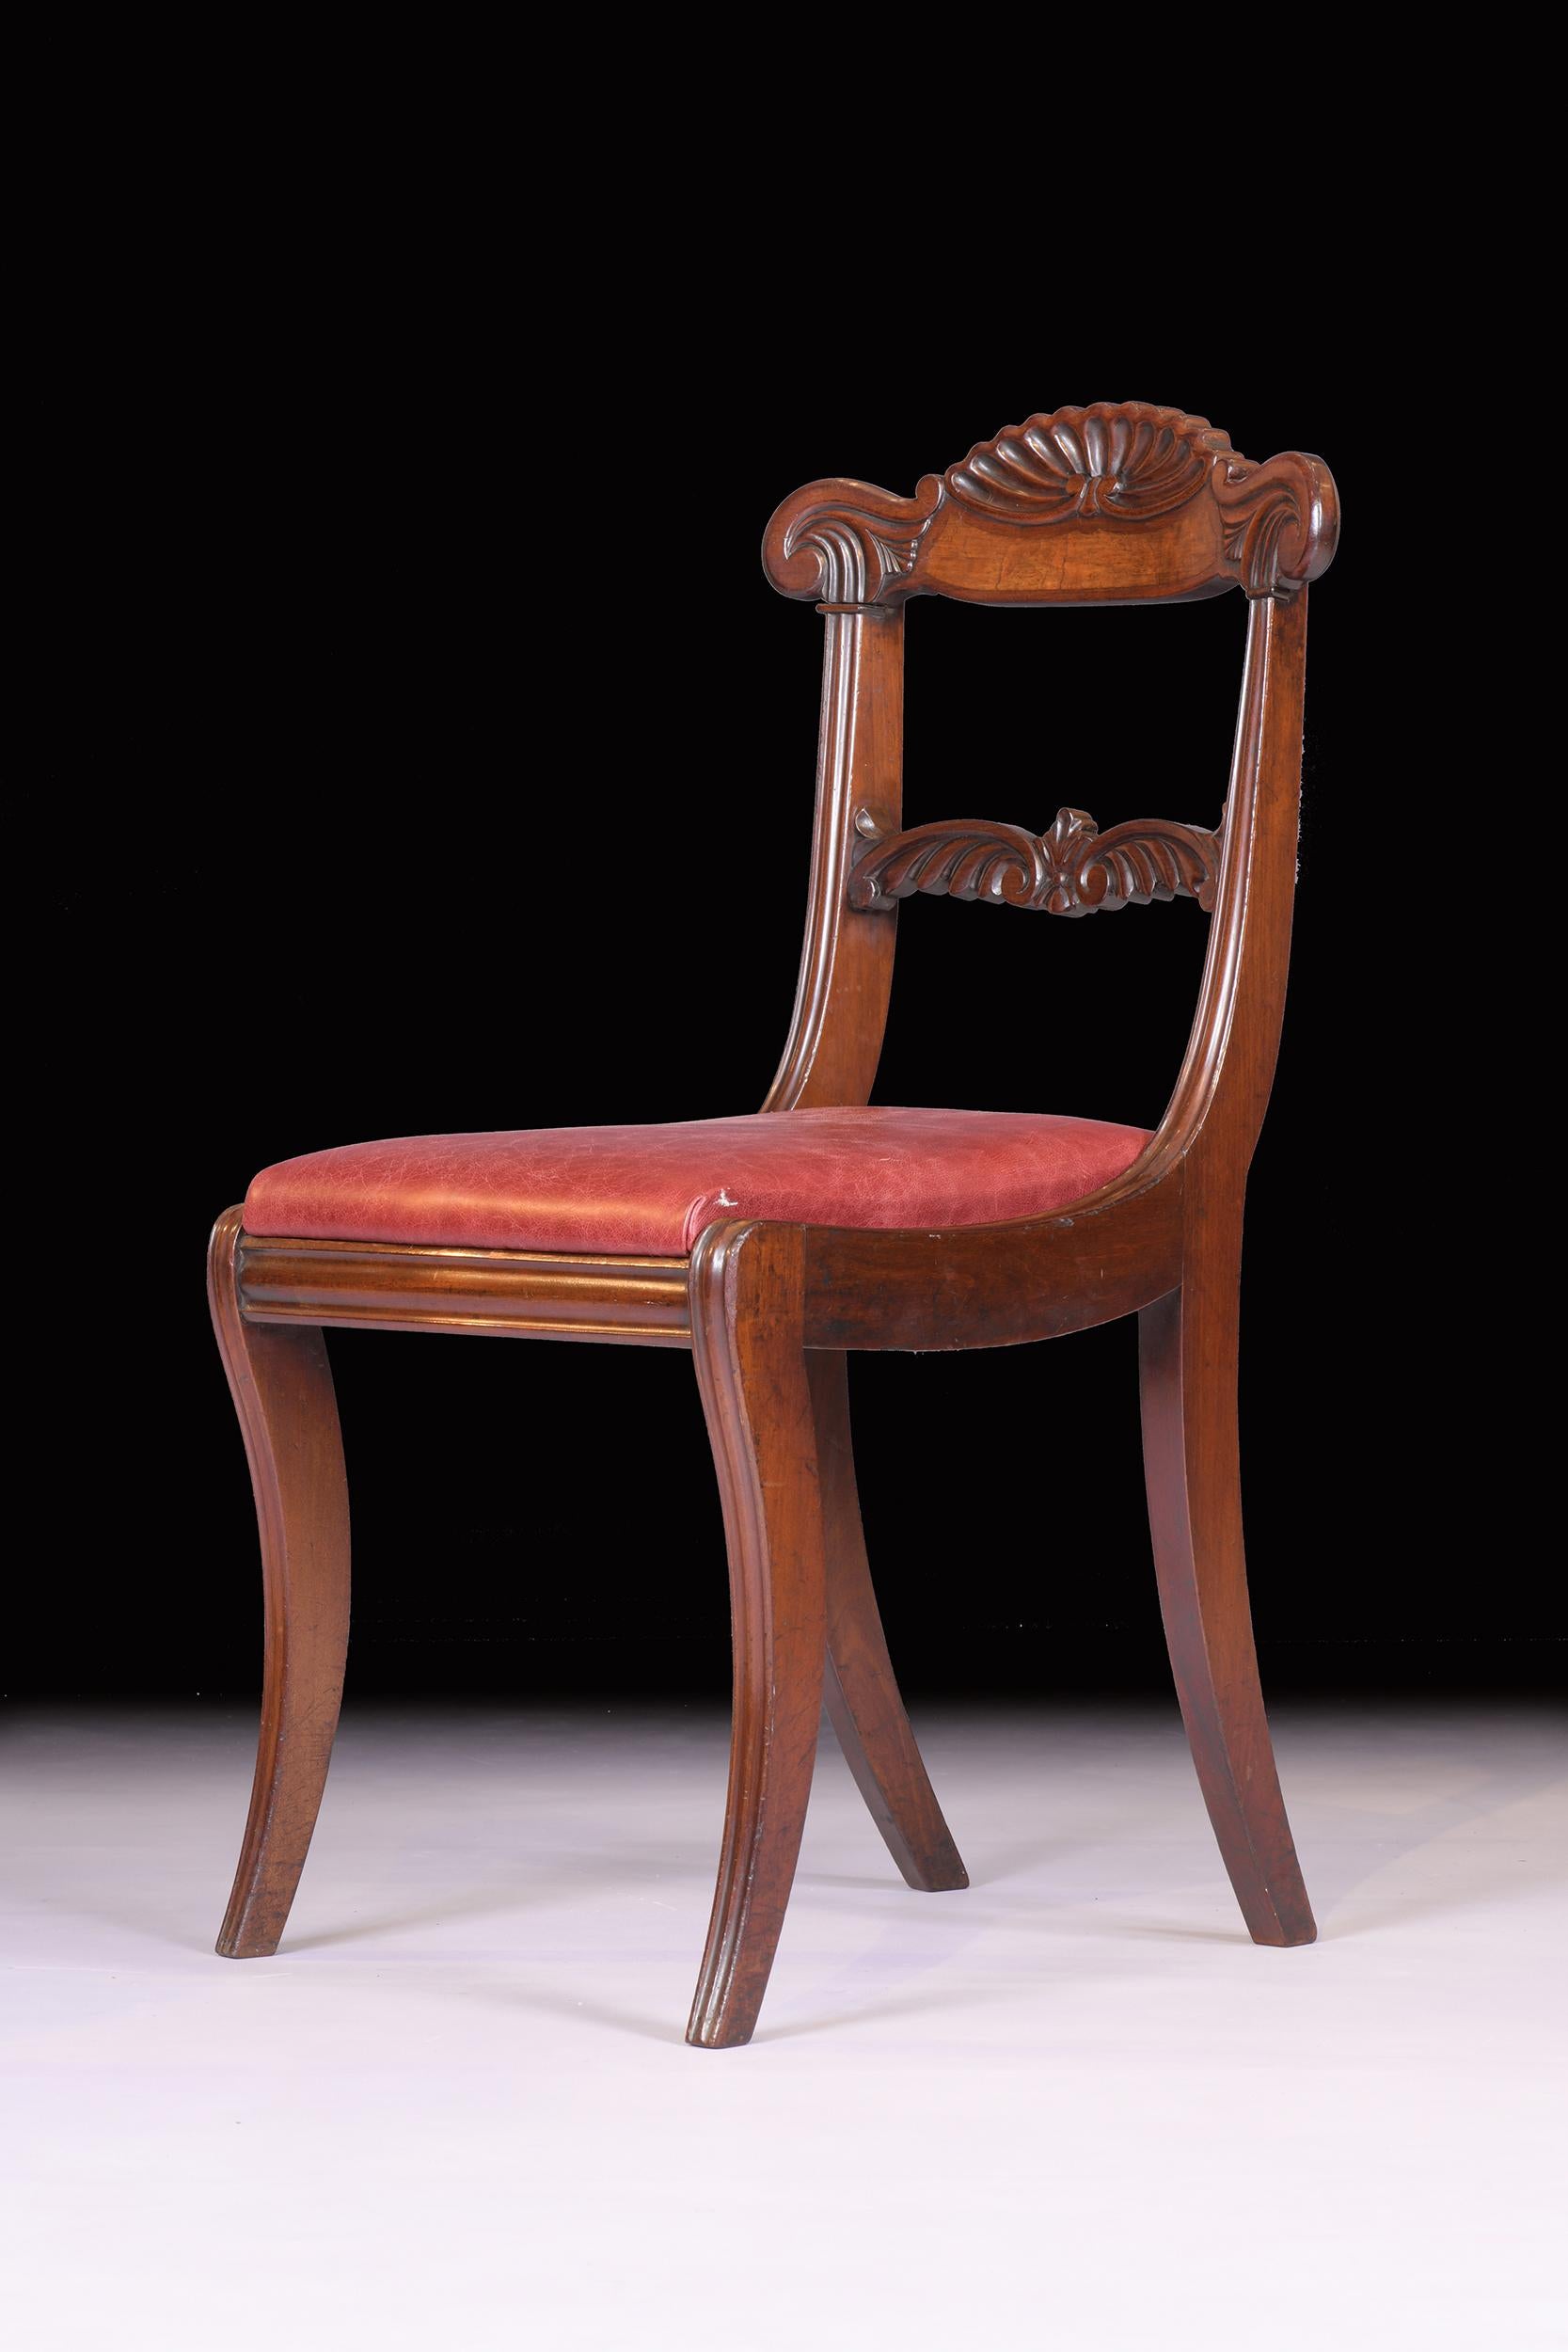 Set of 10 Early 19th Century Regency Mahogany Dining Room Chairs For Sale 4